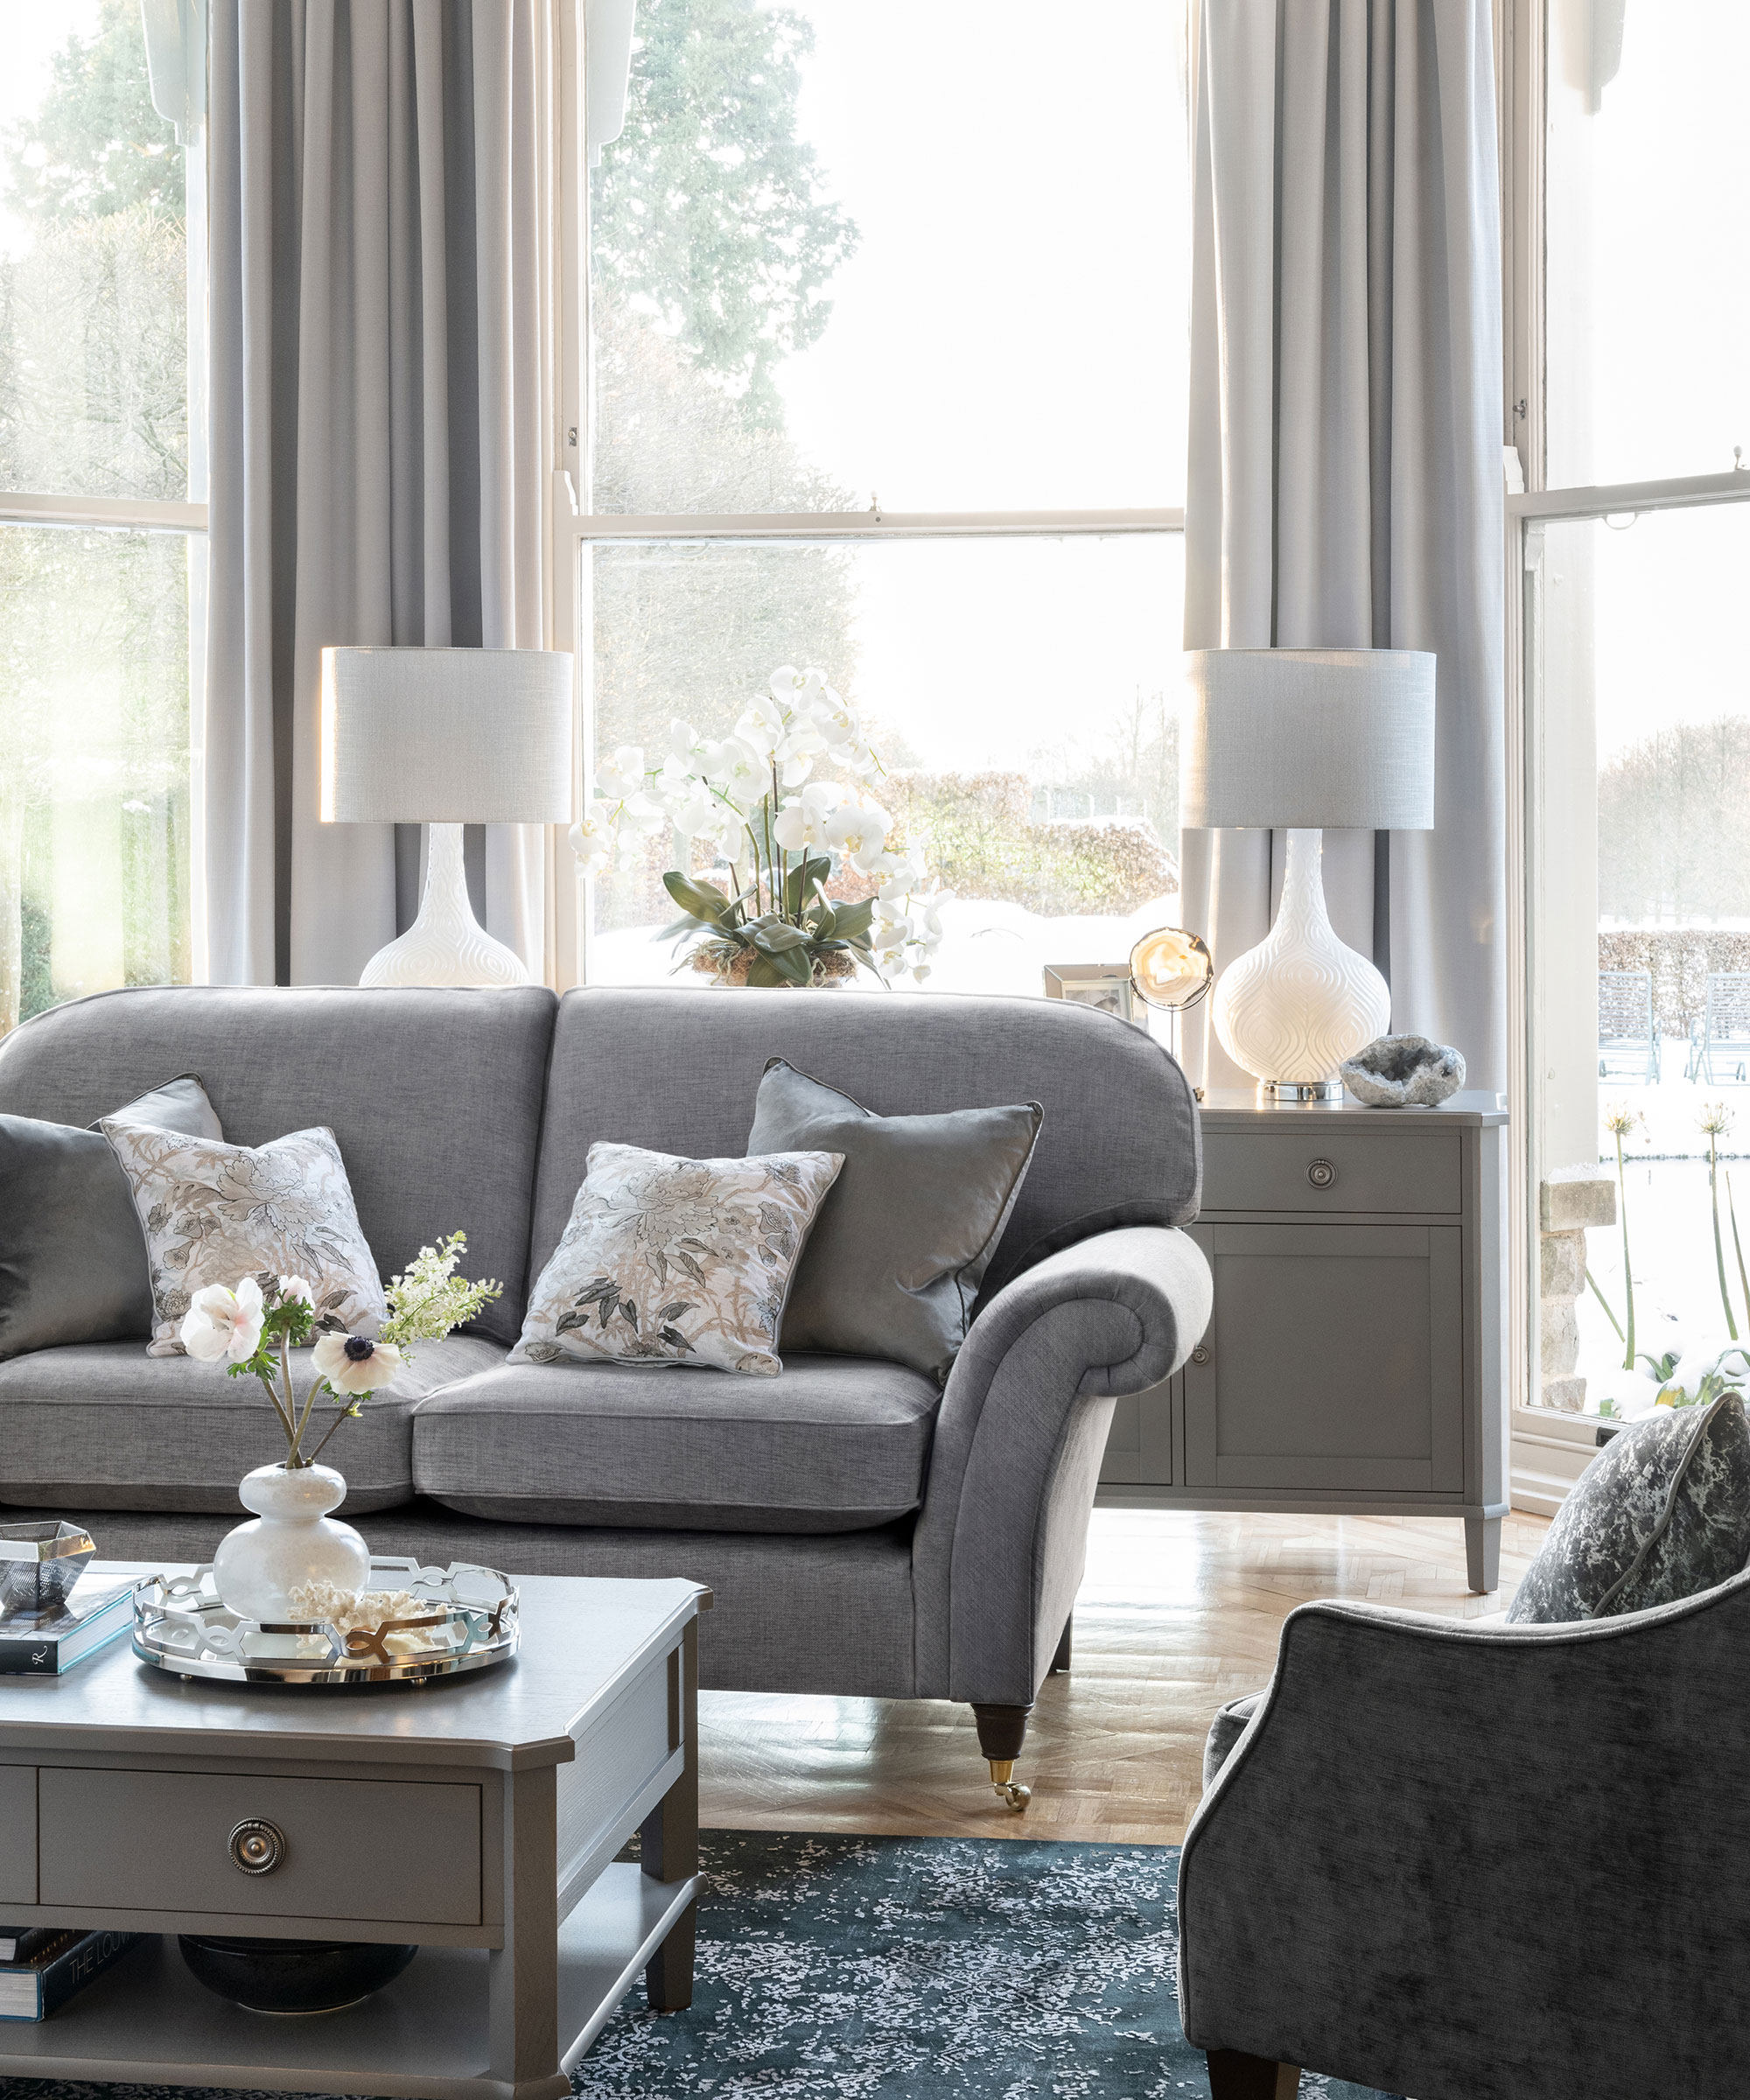 Gray sofa with patterned cushions in front of bay window with light gray curtains and gray cabinet with flowers and white/gray matching table lamps